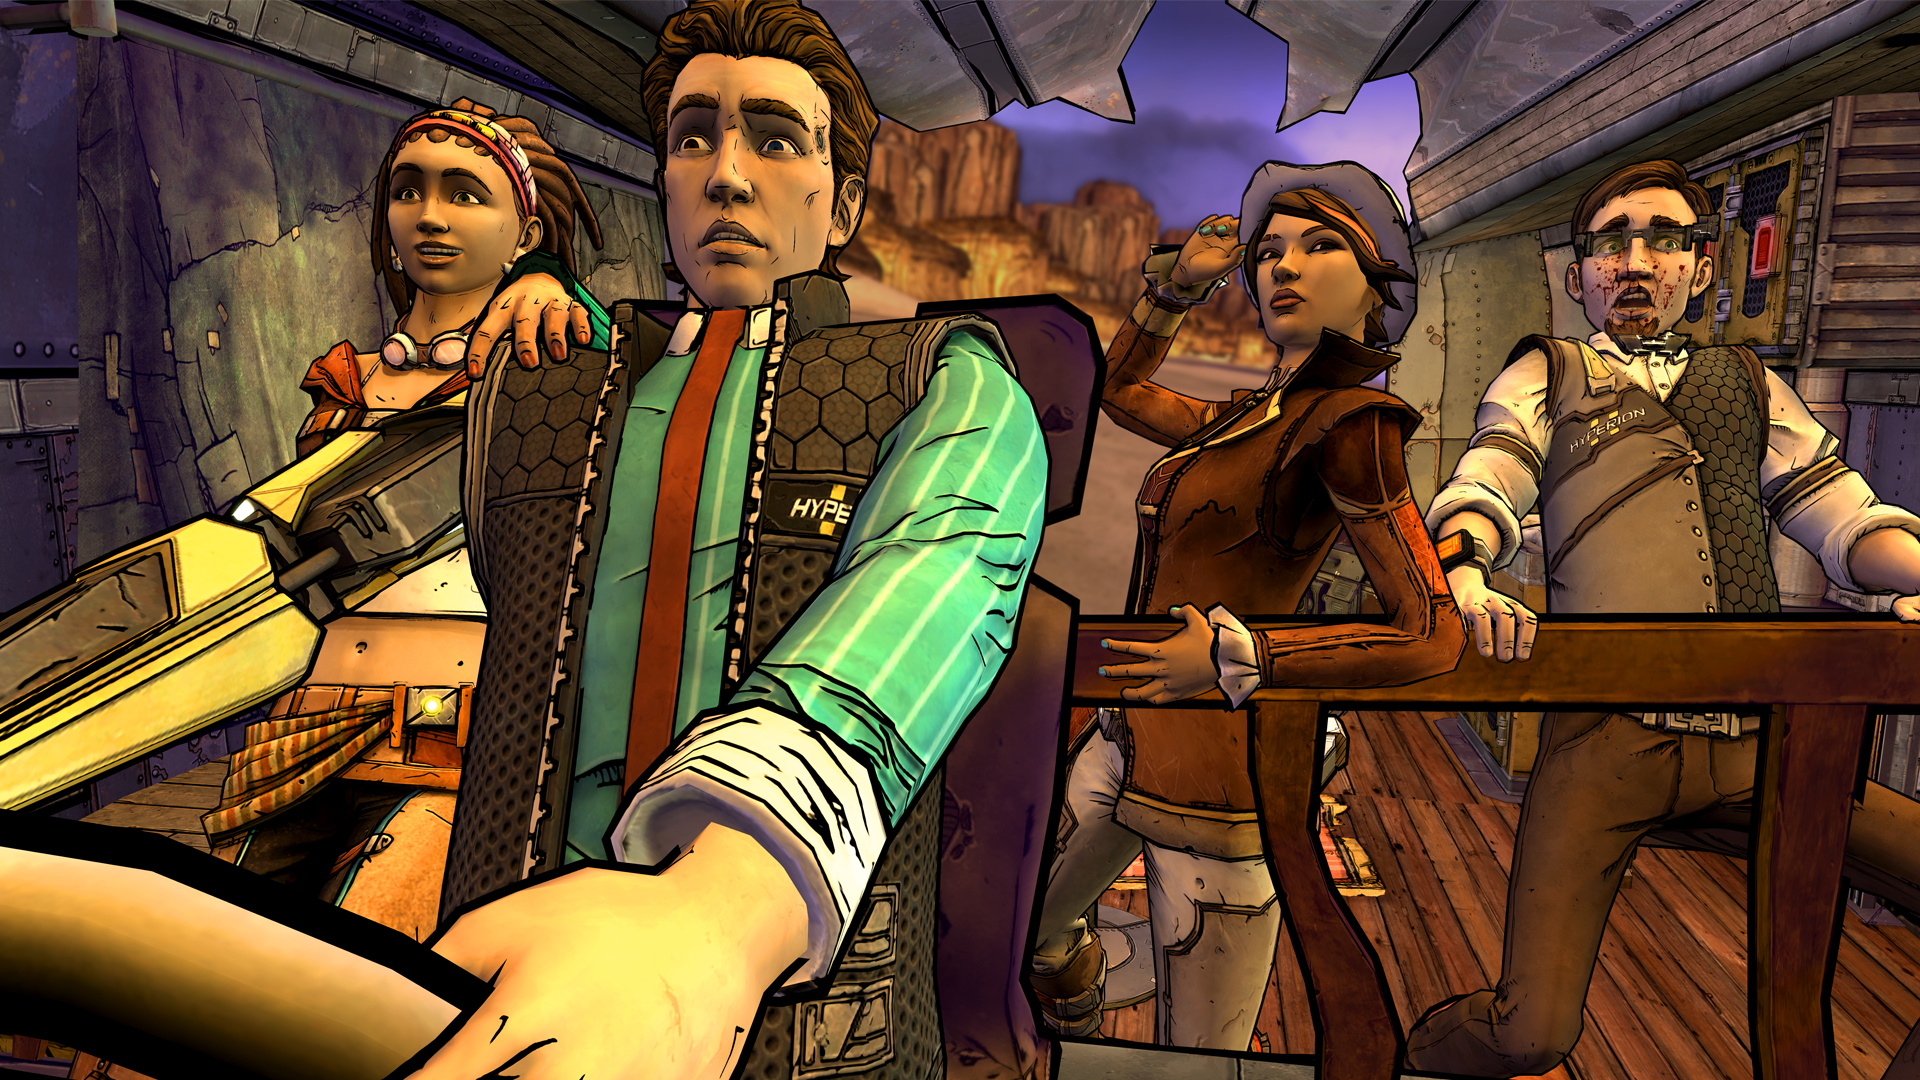 Netflix to partner up with Telltale Games to bolster its